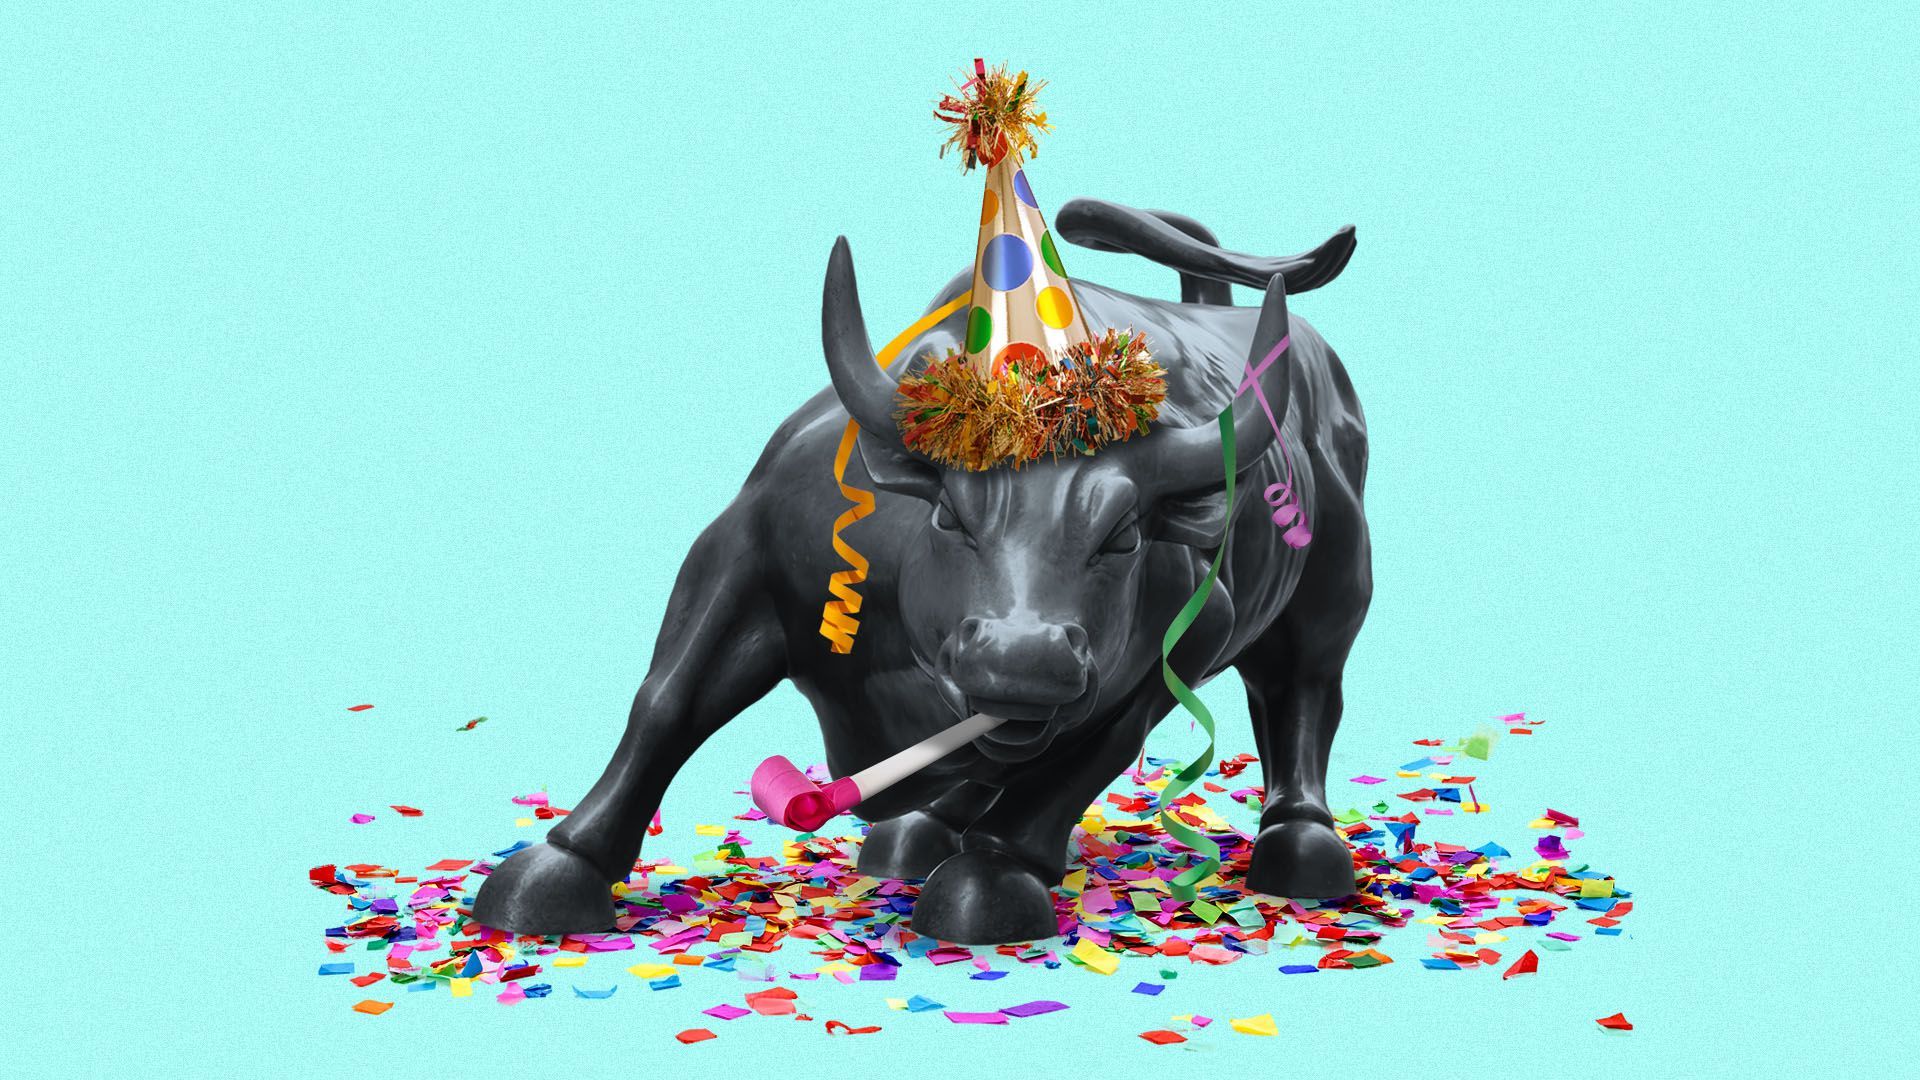 An illustration of the Wall Street bull covered in confetti, wearing a party hat.